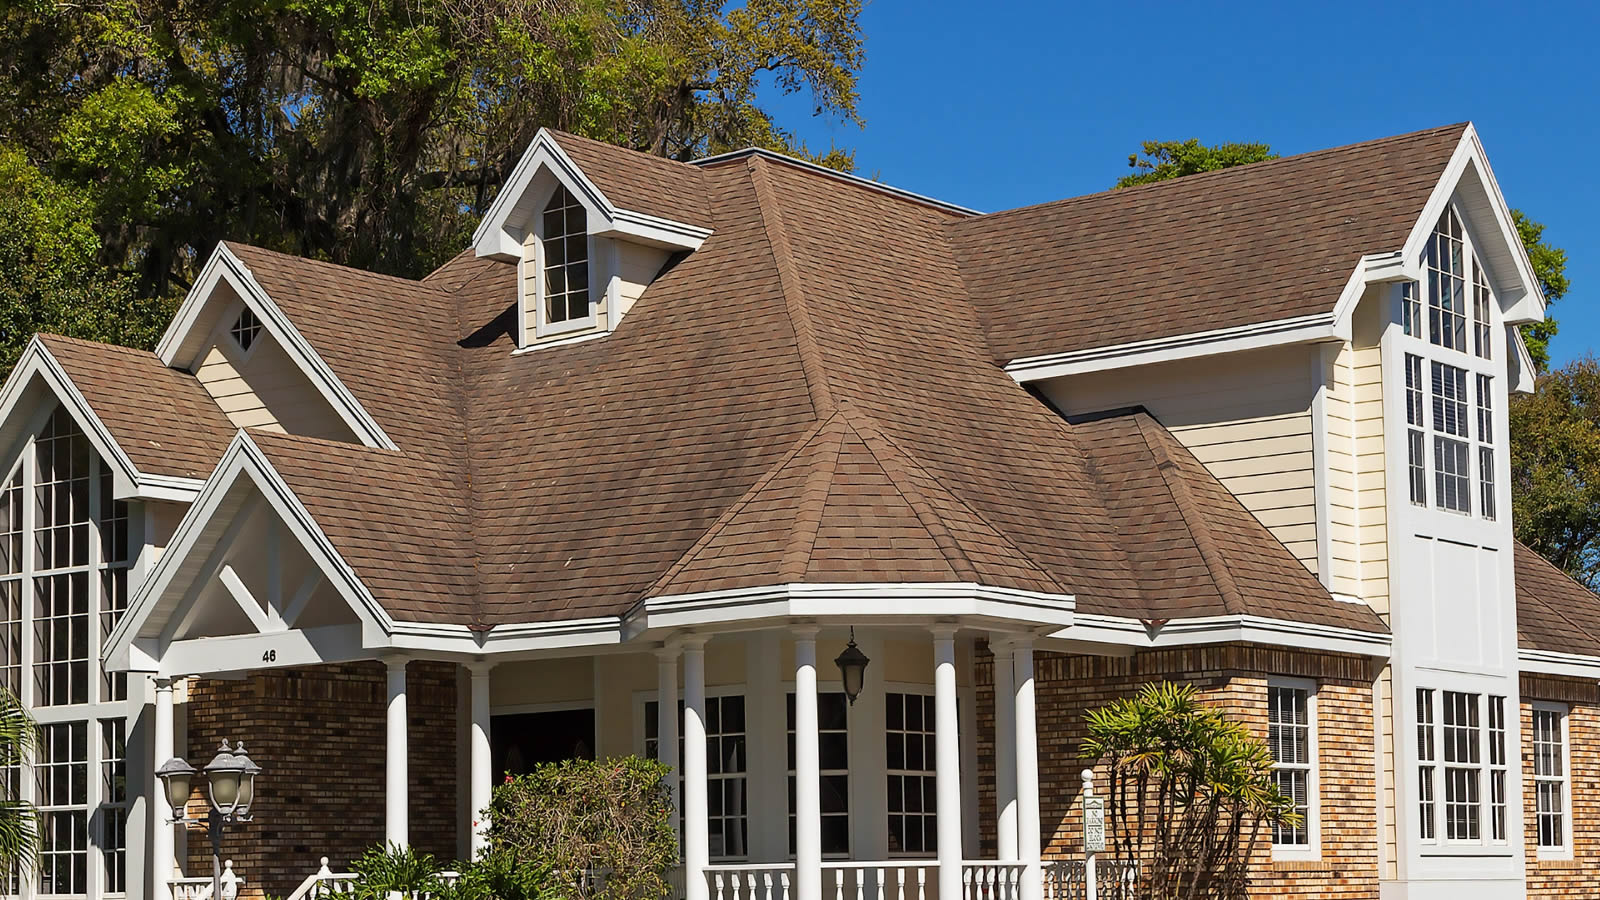 Local Lawrenceville Roofing Contractor 